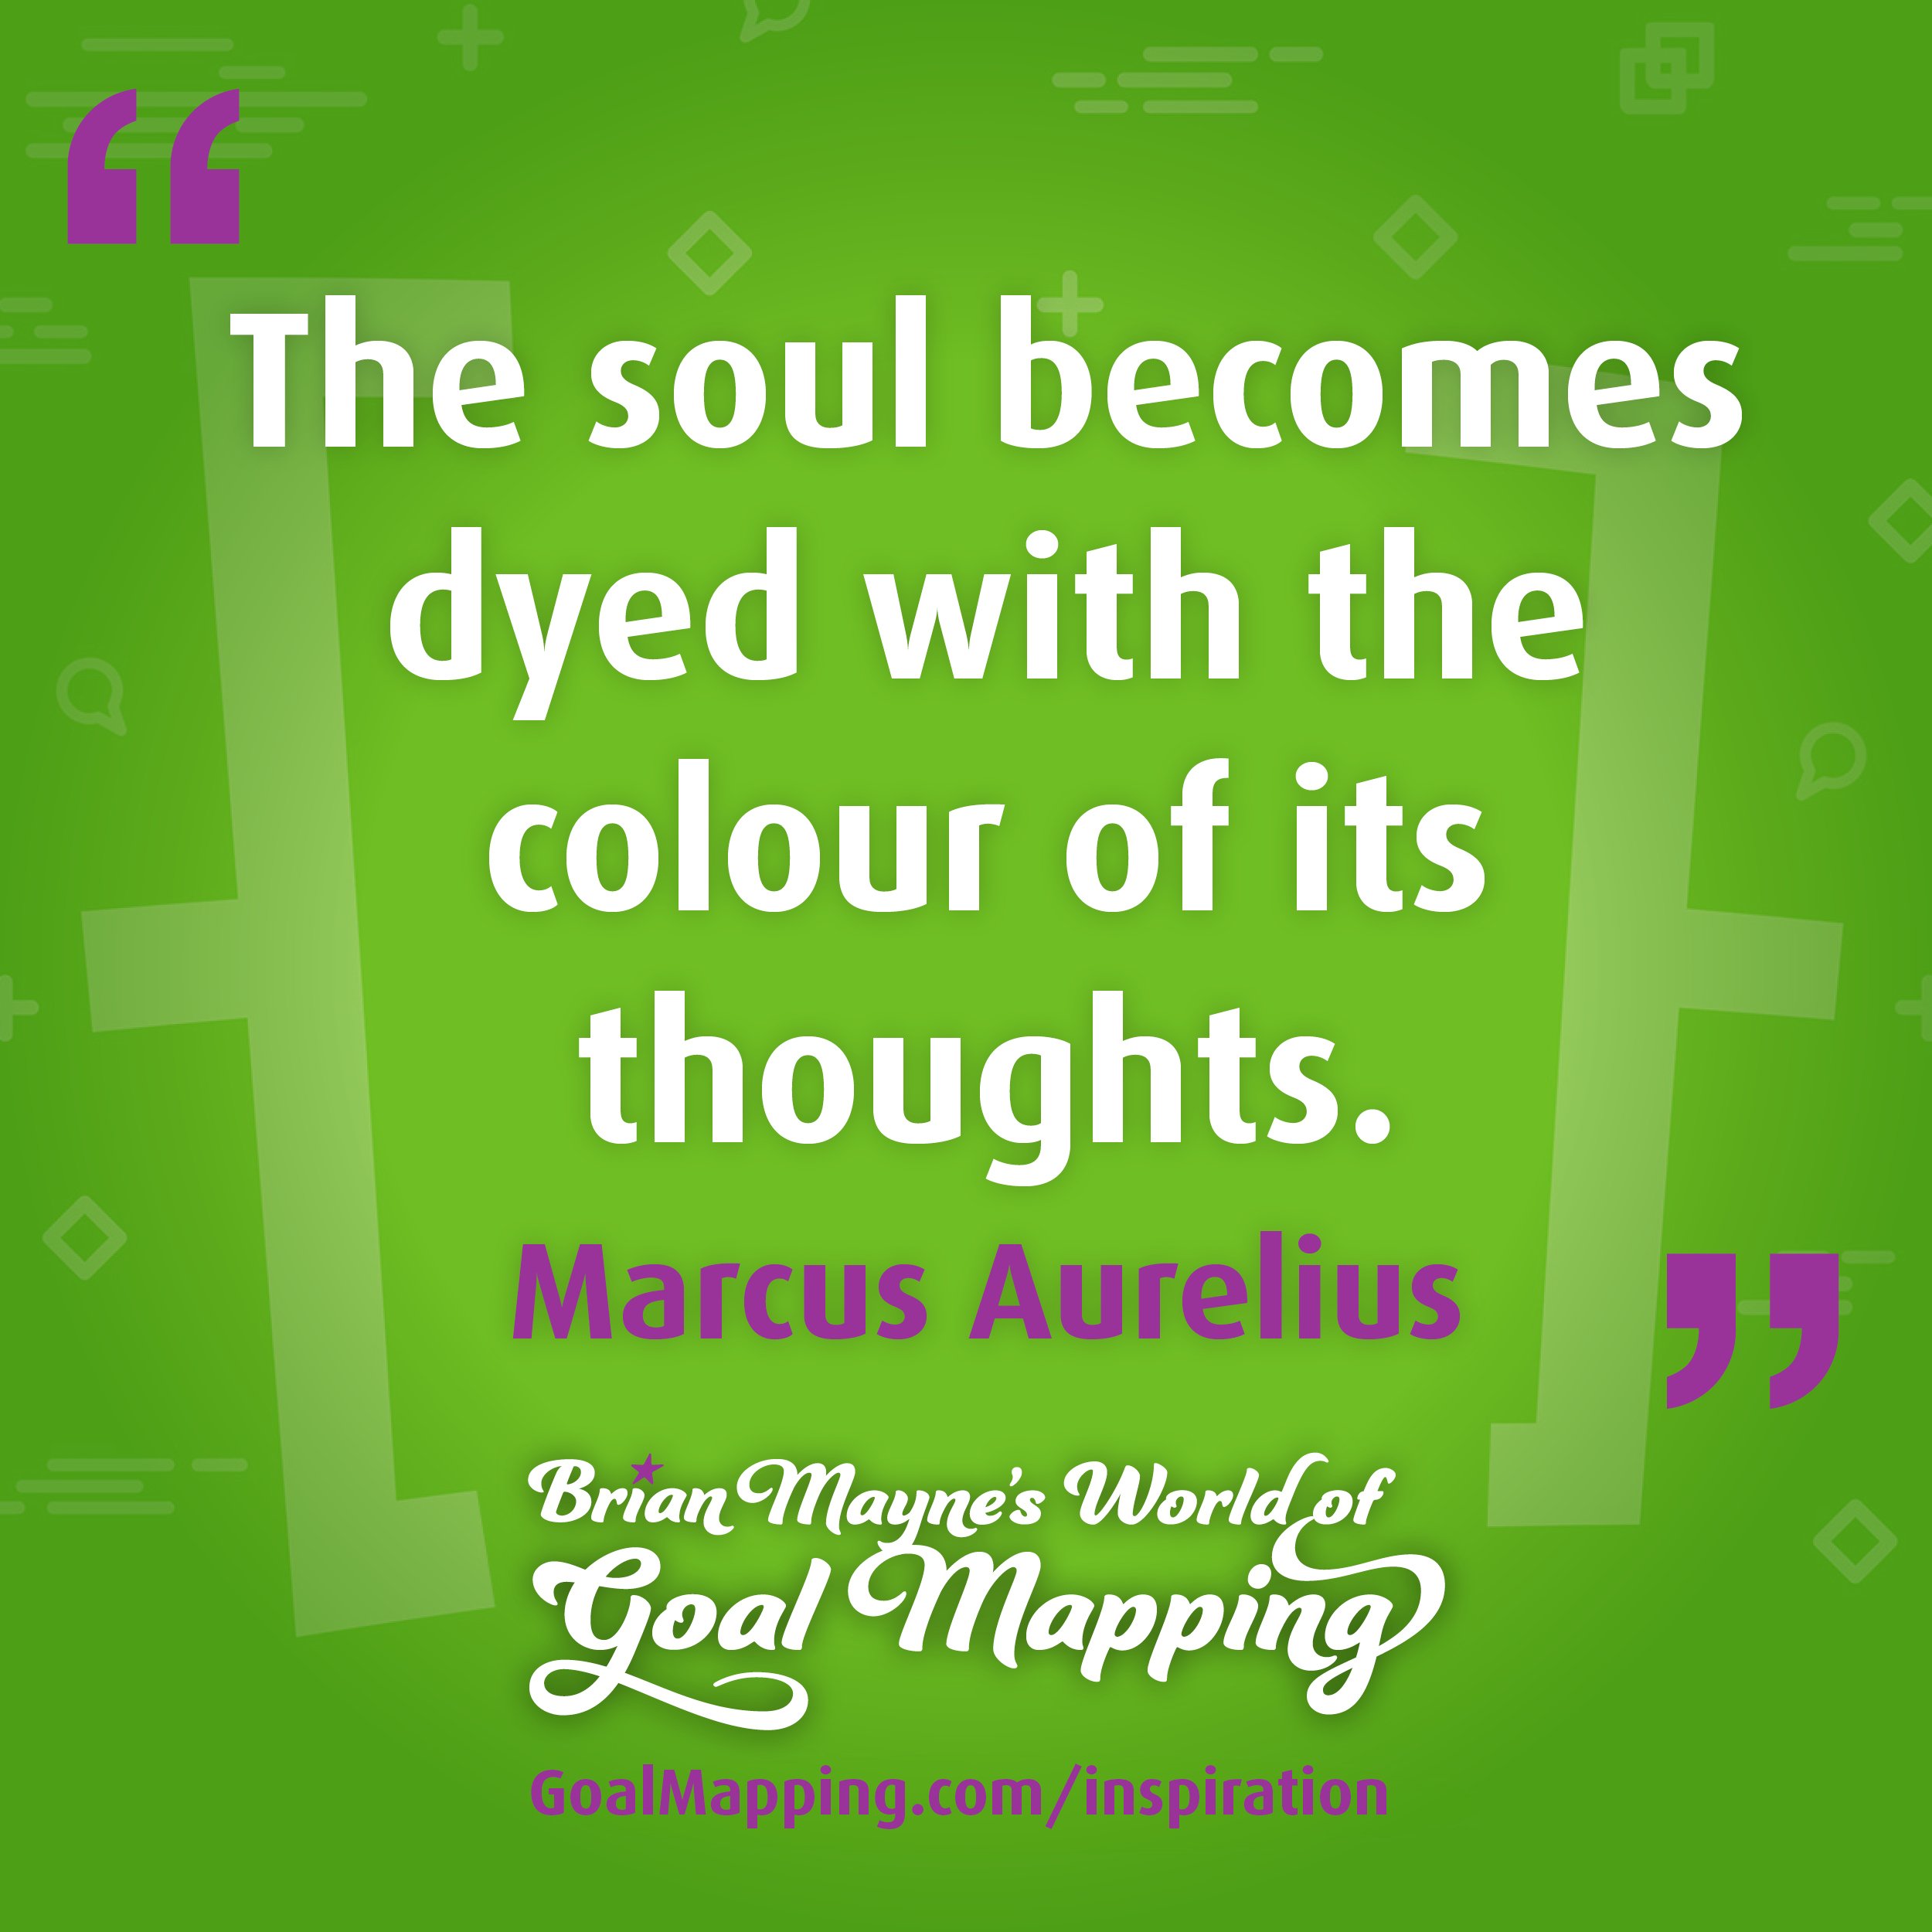 "The soul becomes dyed with the colour of its thoughts." Marcus Aurelius